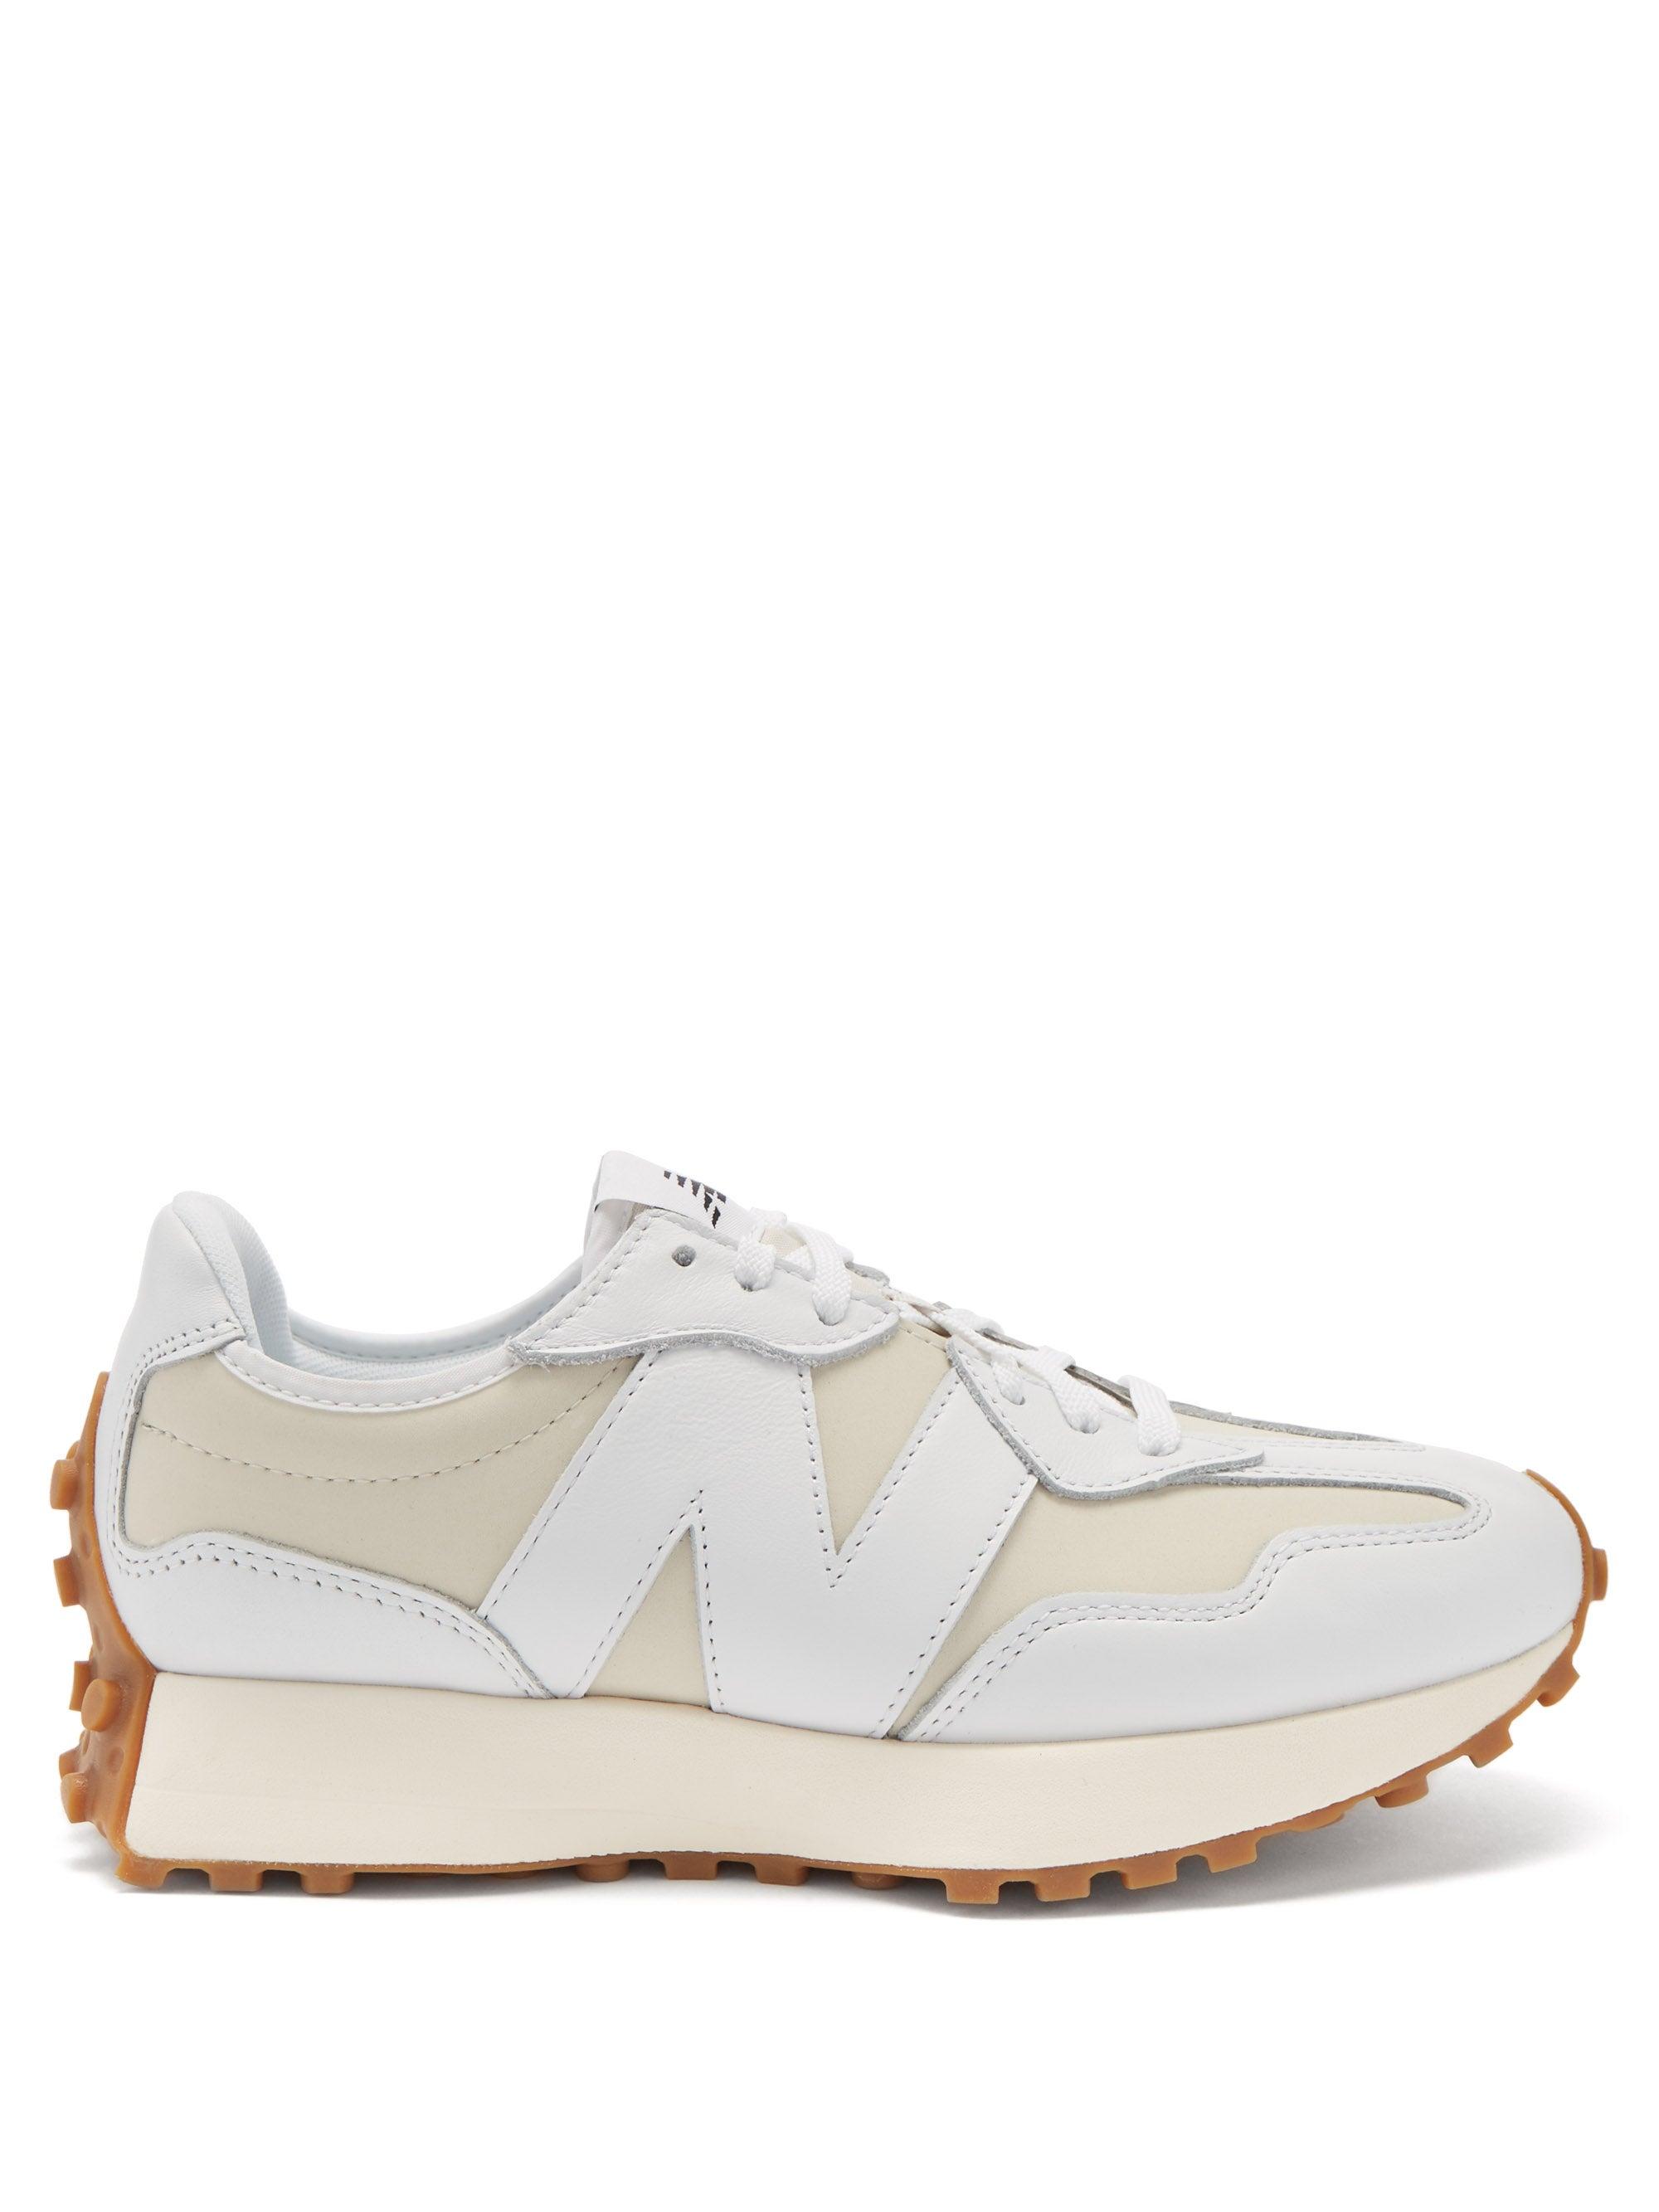 New Balance 327 Leather And Mesh Trainers in White | Lyst